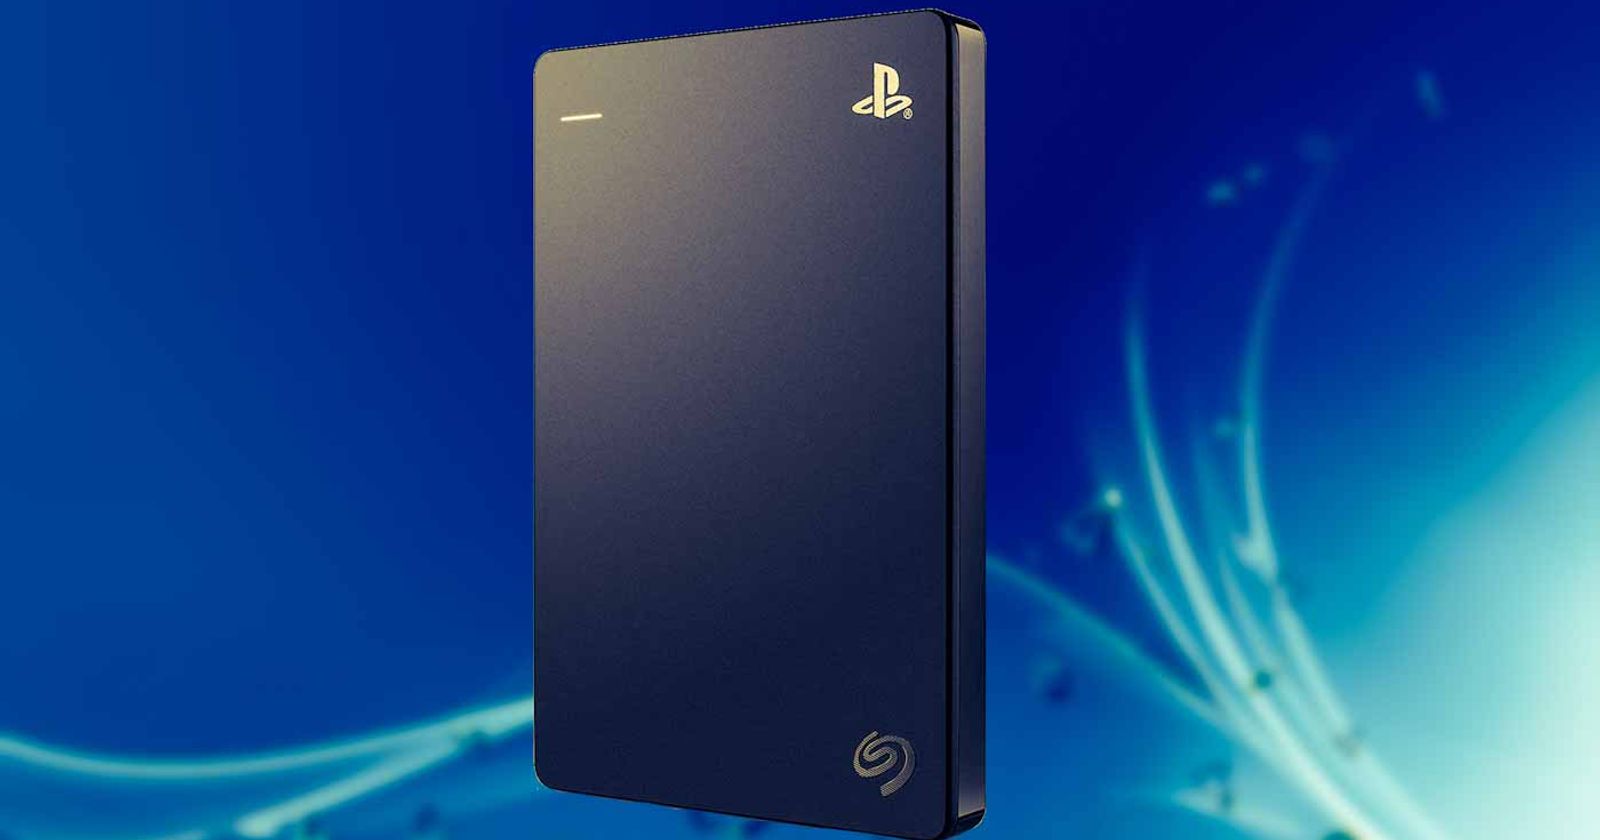 how-to-fix-a-corrupted-external-hard-drive-ps4